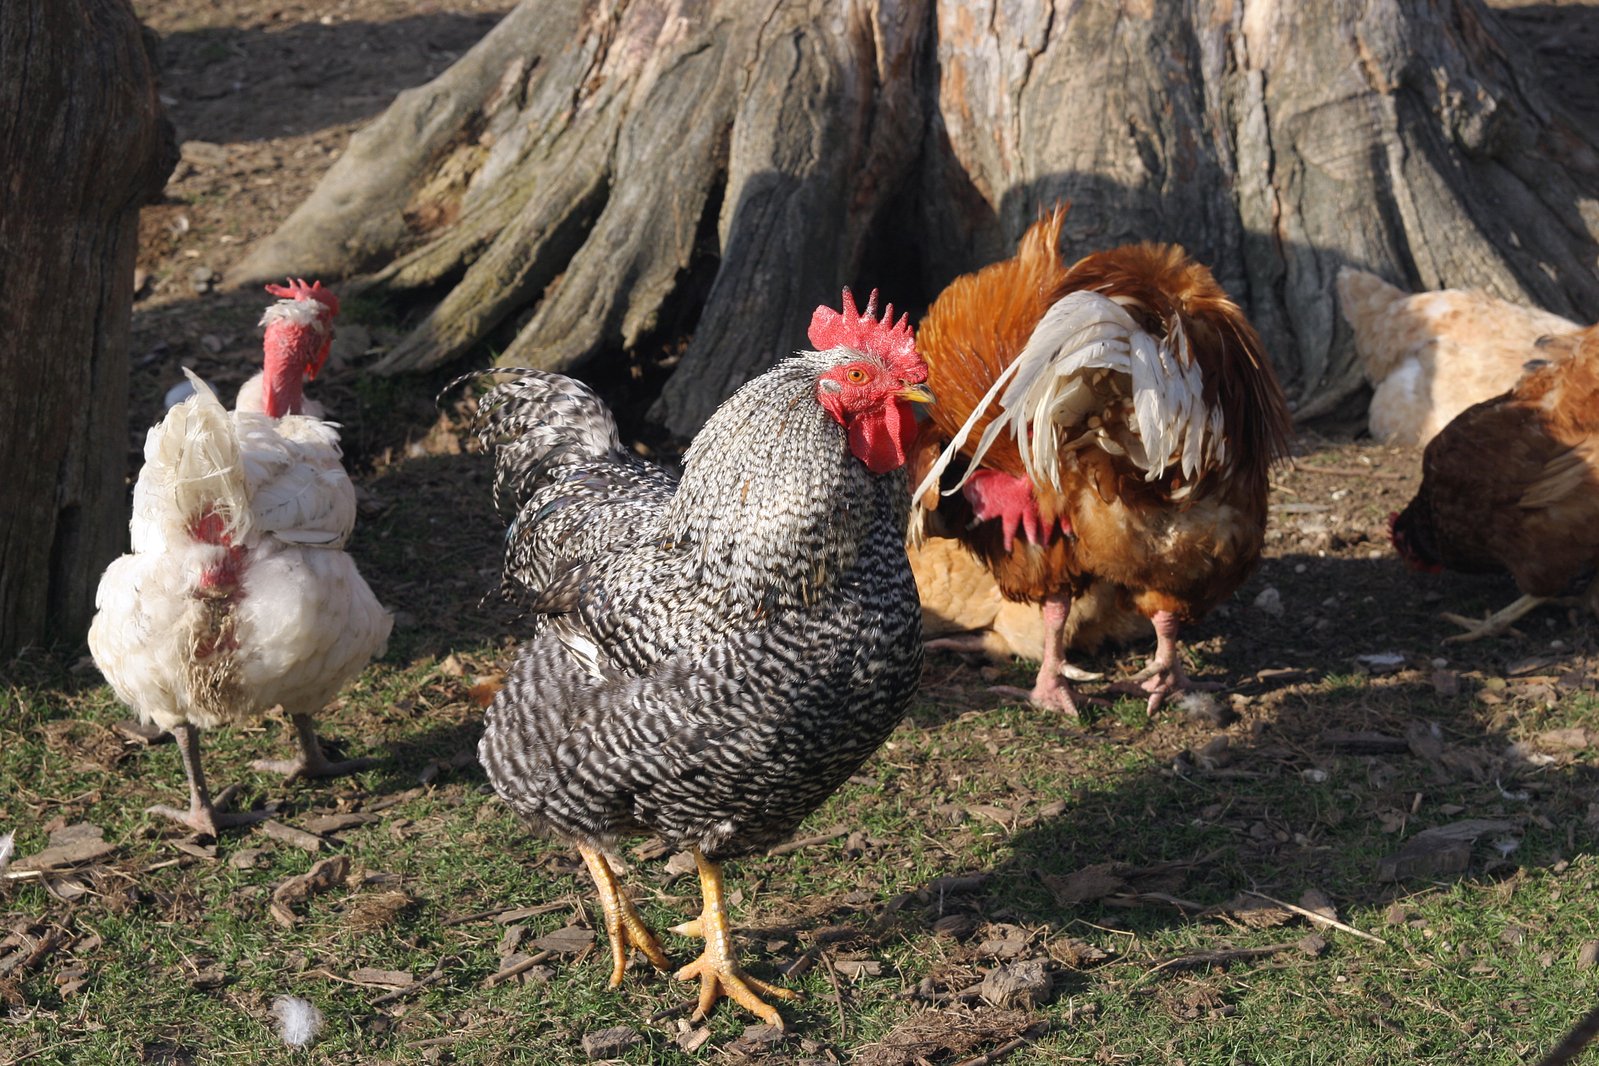 a group of chickens in front of a large tree stump